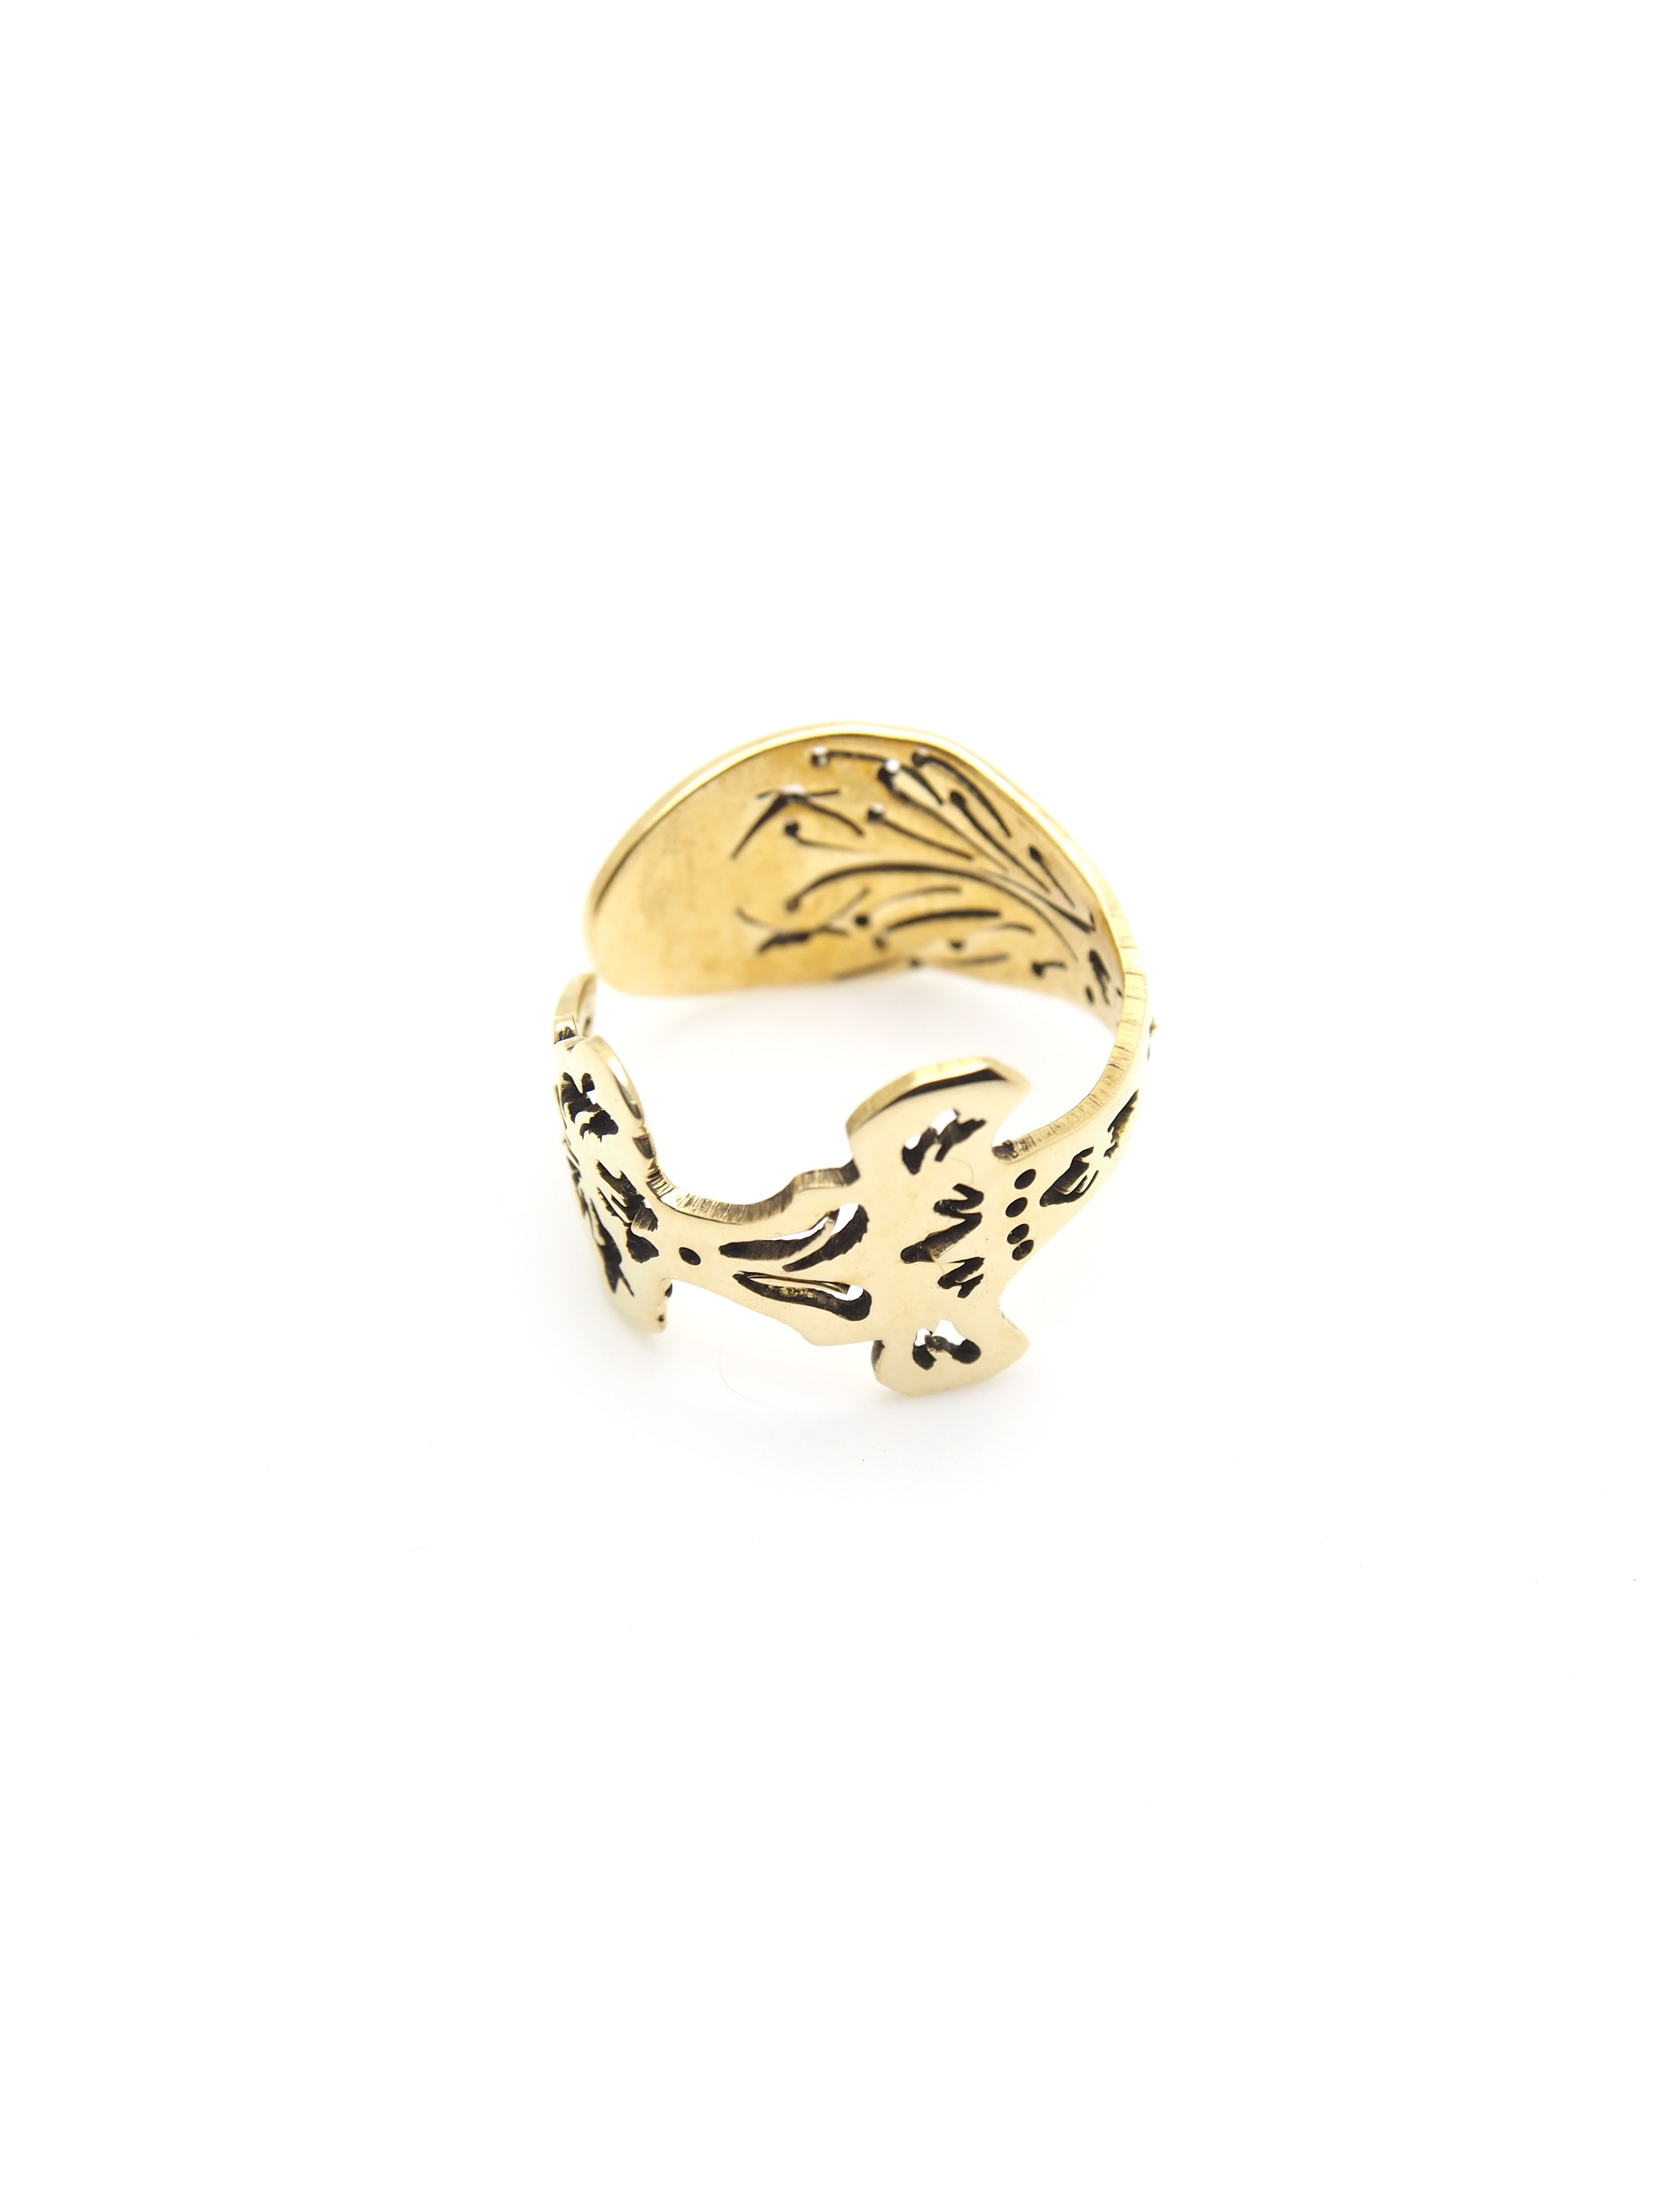 Hansel & Smith - MUSEUM LABEL Spoon Ring